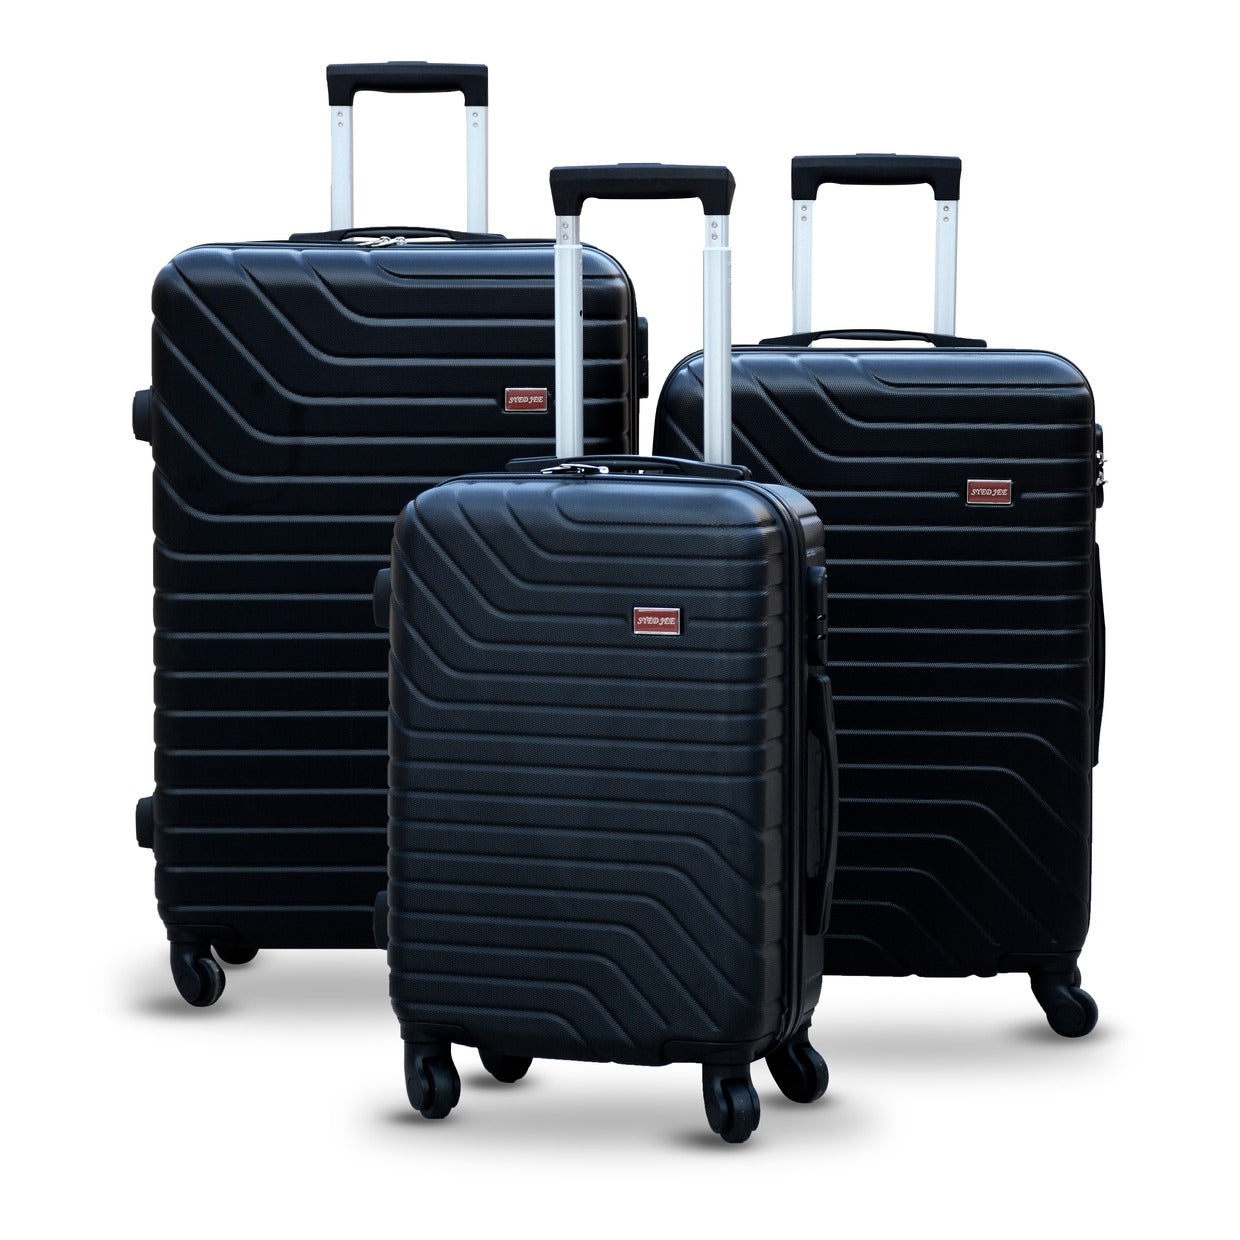 3 Pcs Full Set Black SJ New ABS Light Weight Travel Luggage 20" 24" 28 Inches Hard case Trolley Baggage zaappy uae